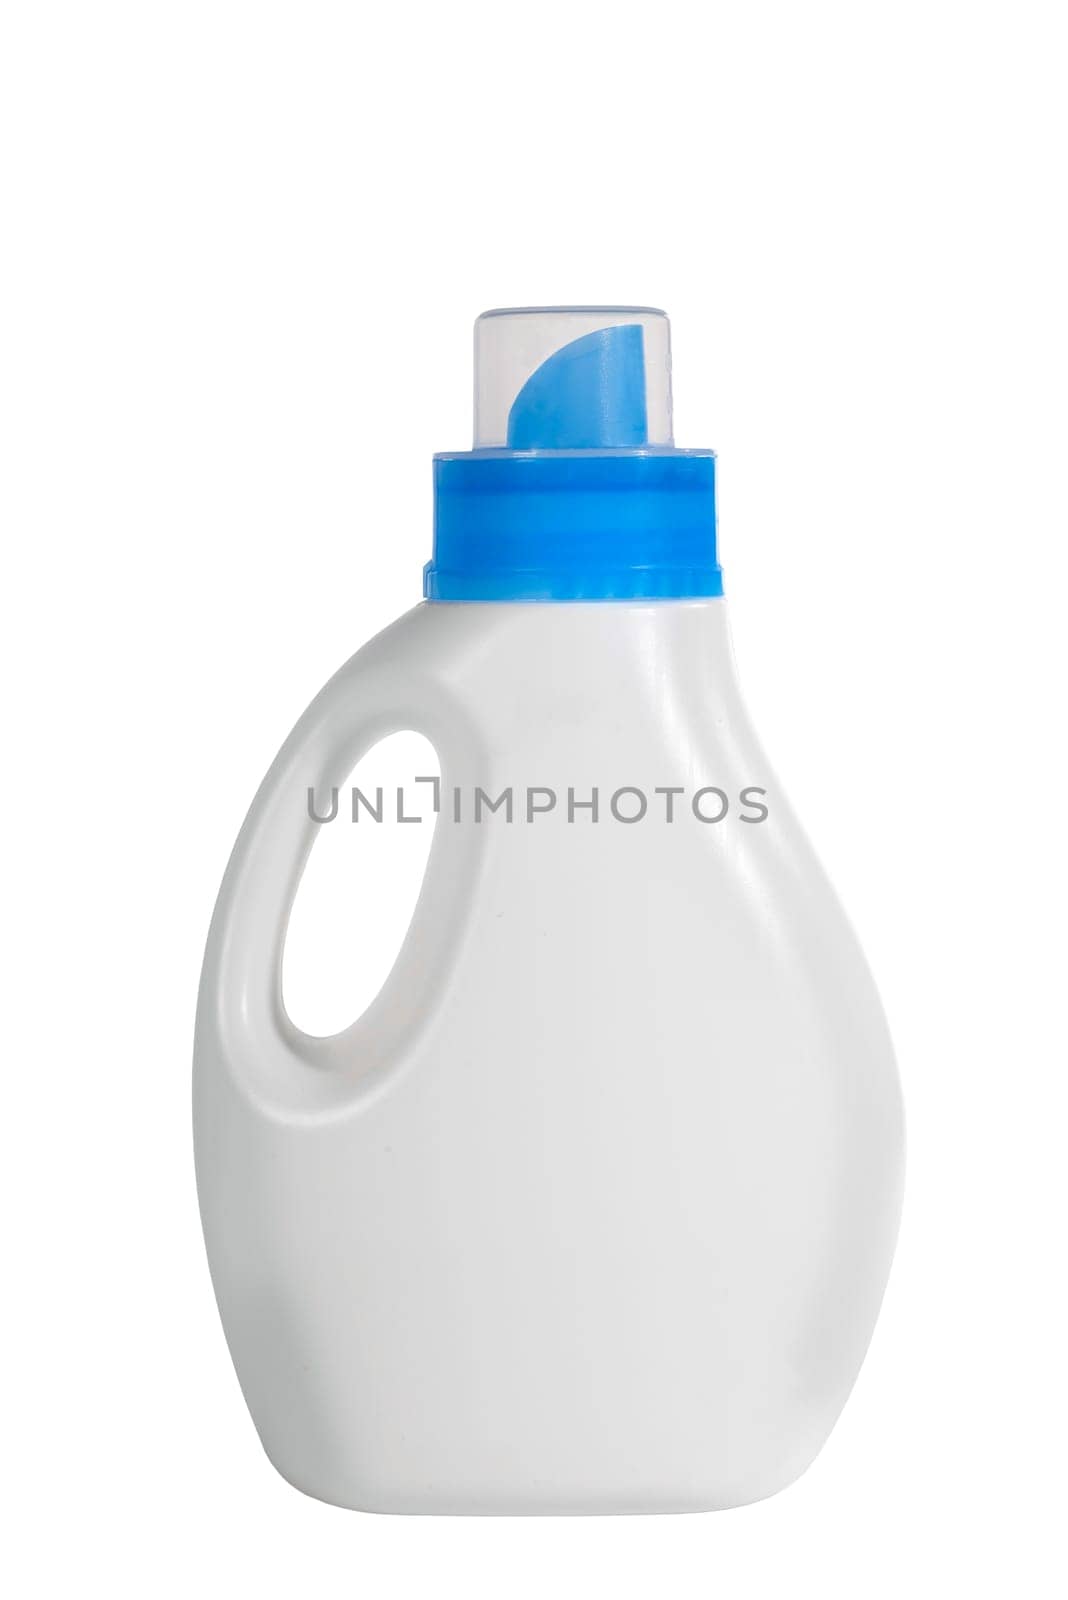 White plastic bottle blue cap isolated on white. Bottle with detergent. Cleaning concept.